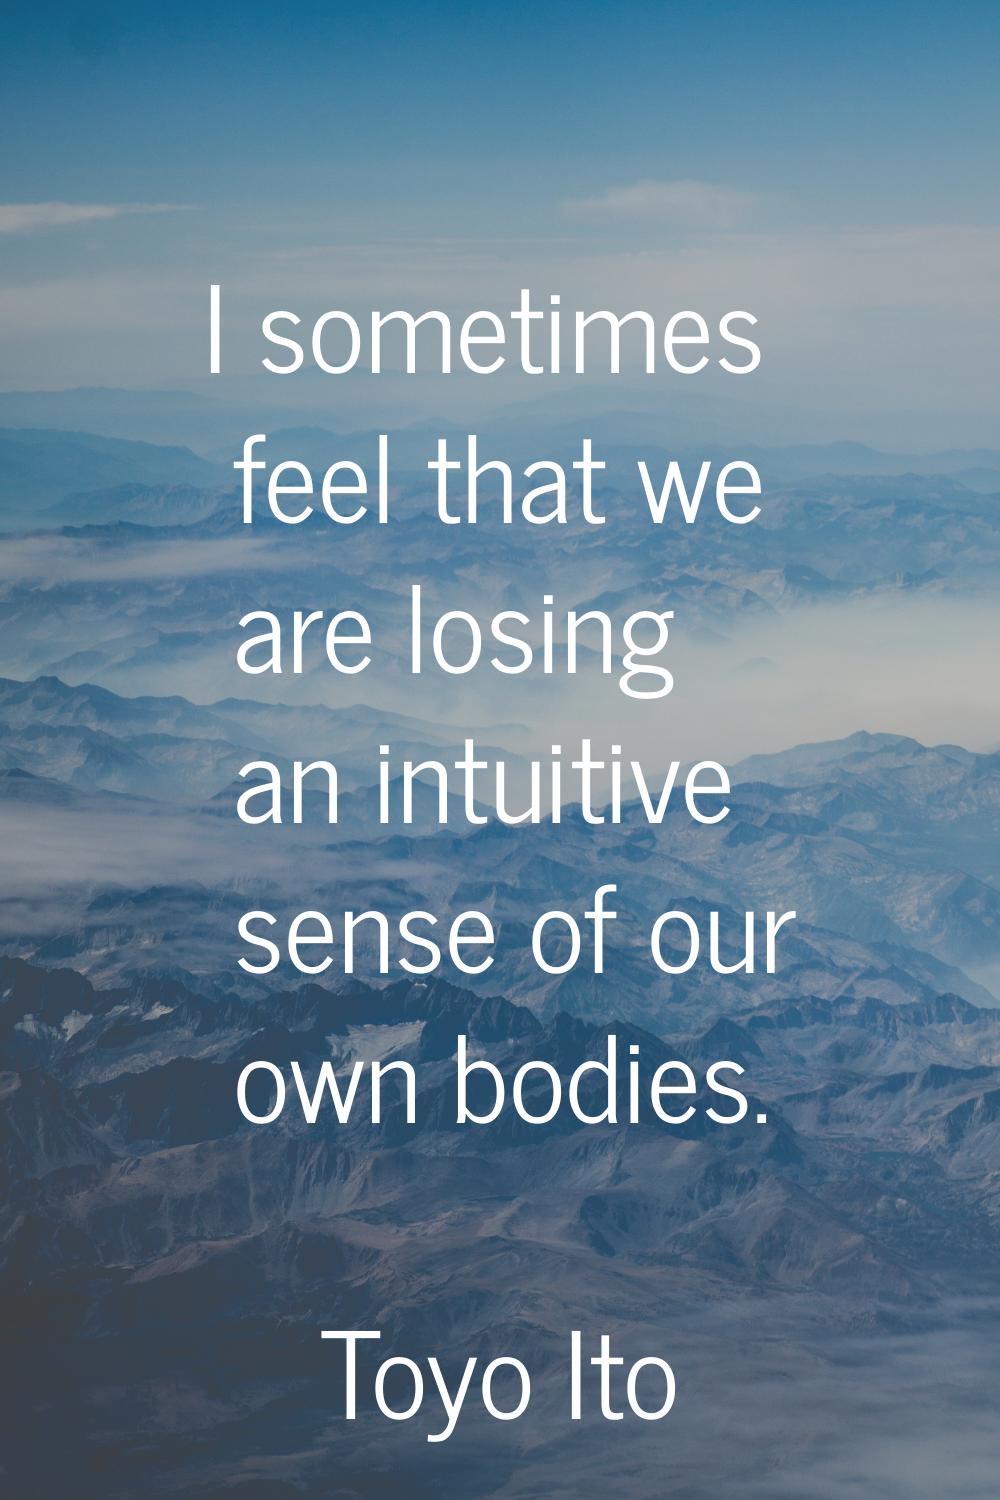 I sometimes feel that we are losing an intuitive sense of our own bodies.